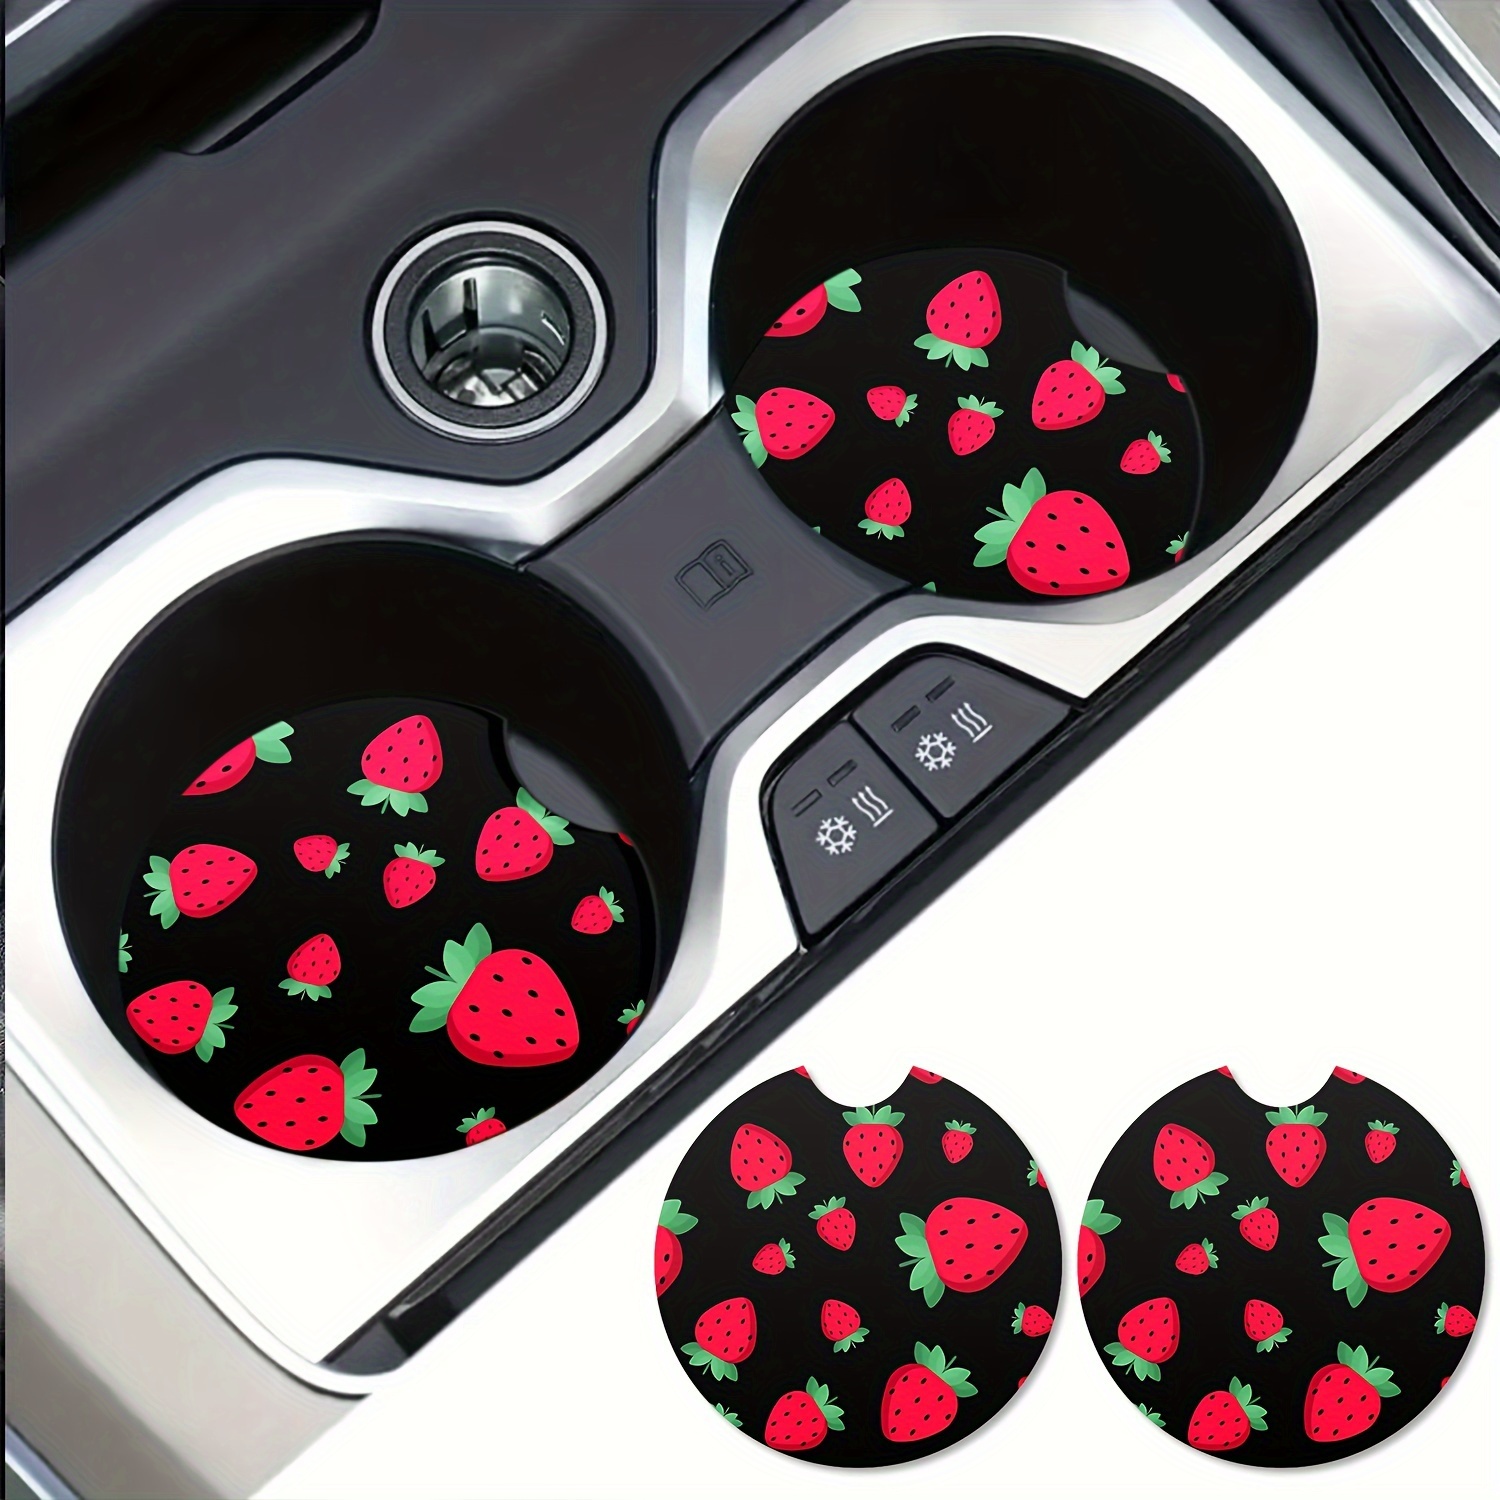 

2pcs Strawberry Pattern Rubber Non-slip Car Cup Holder Coasters, Cute Car Accessories For Women Cup Coasters For Most Car